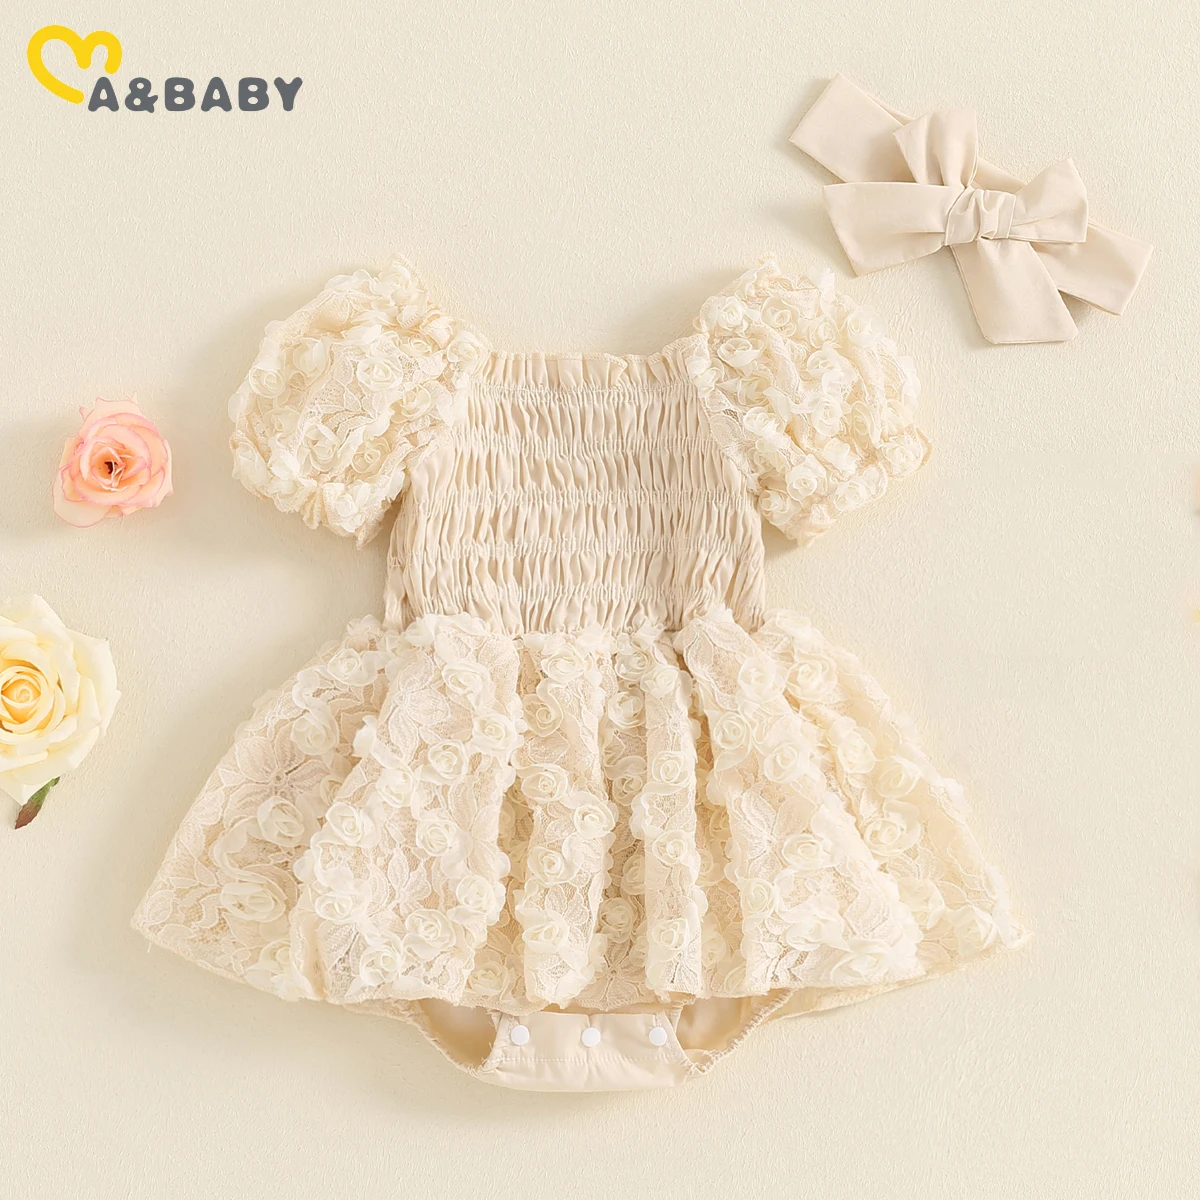 

ma&baby 0-18M Baby Girl Romper Newborn Infant Toddler Jumpsuit Flower Lace Tulle Sunsuit Headband Birthday Outfit Summer Clothes